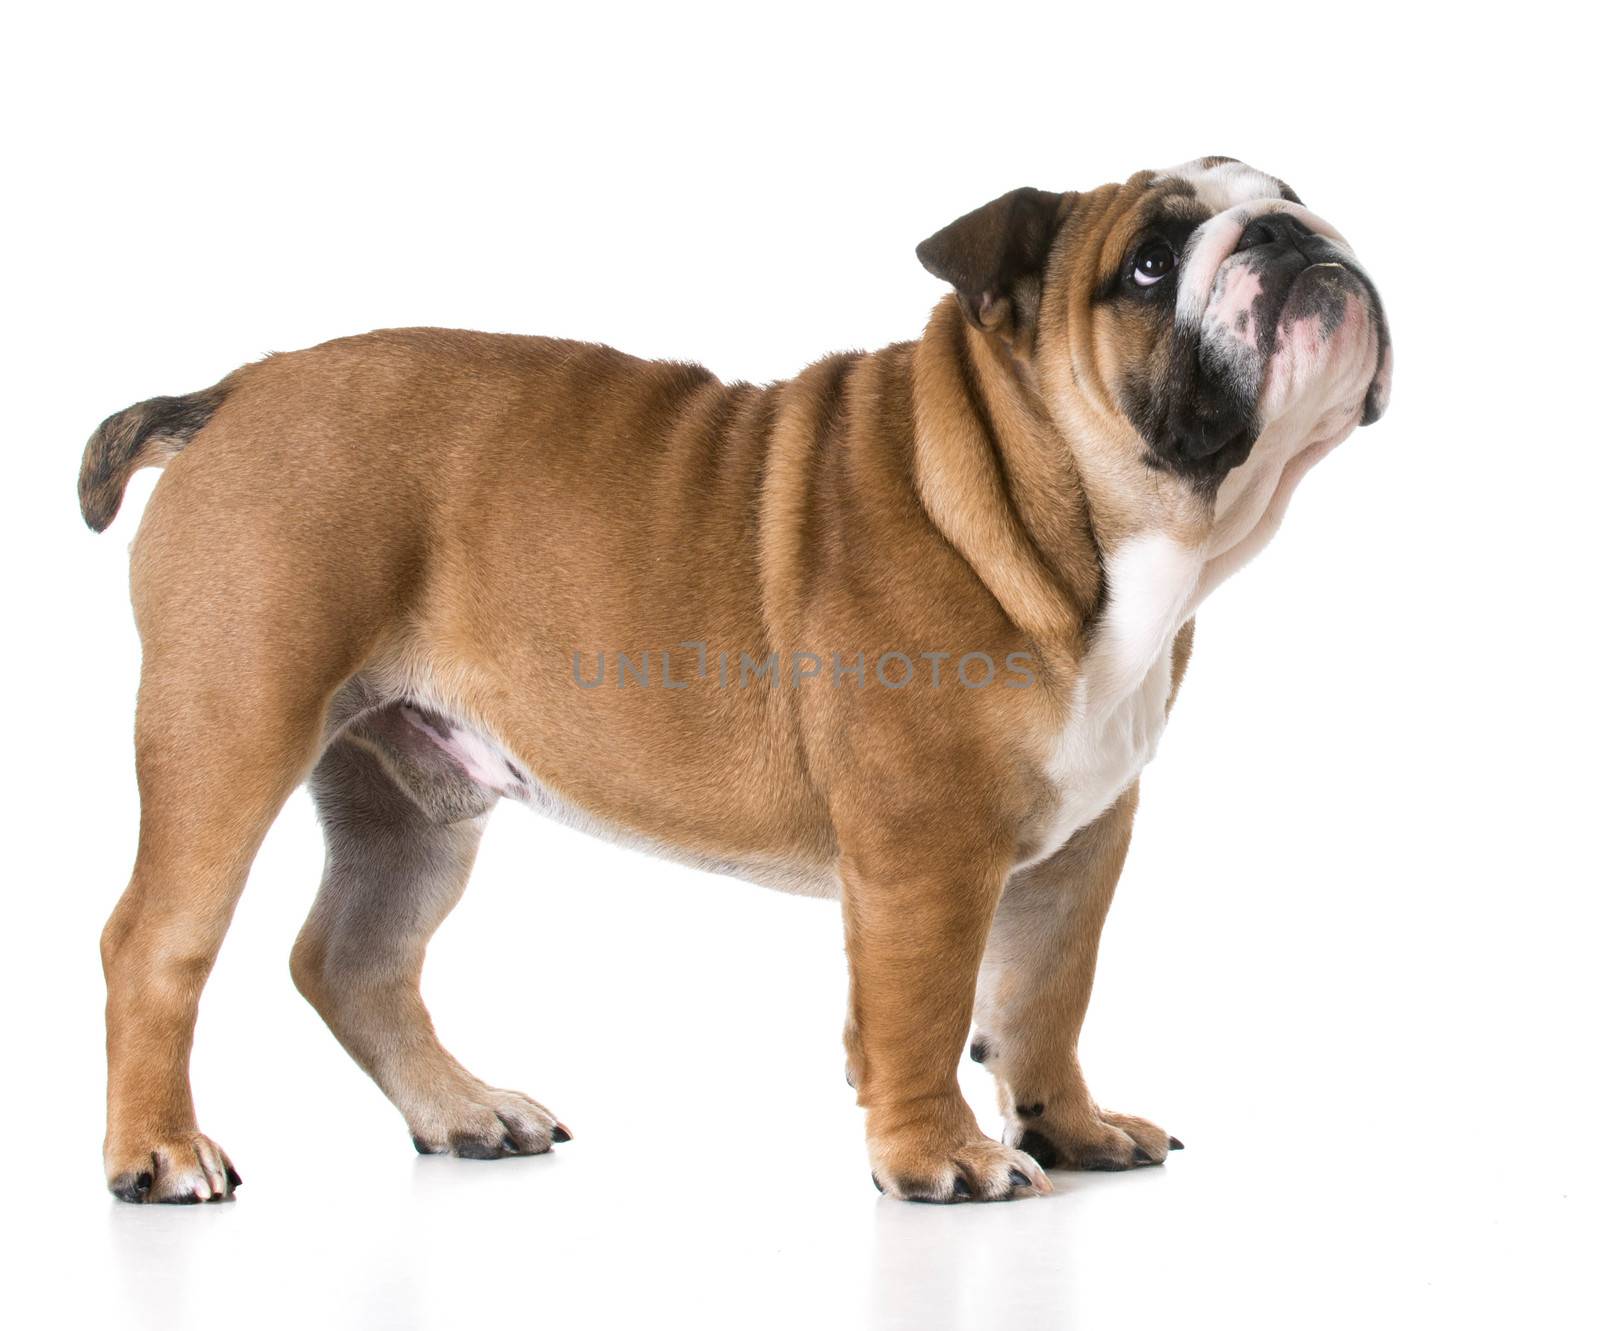 bulldog puppy looking up on white background - 6 months old